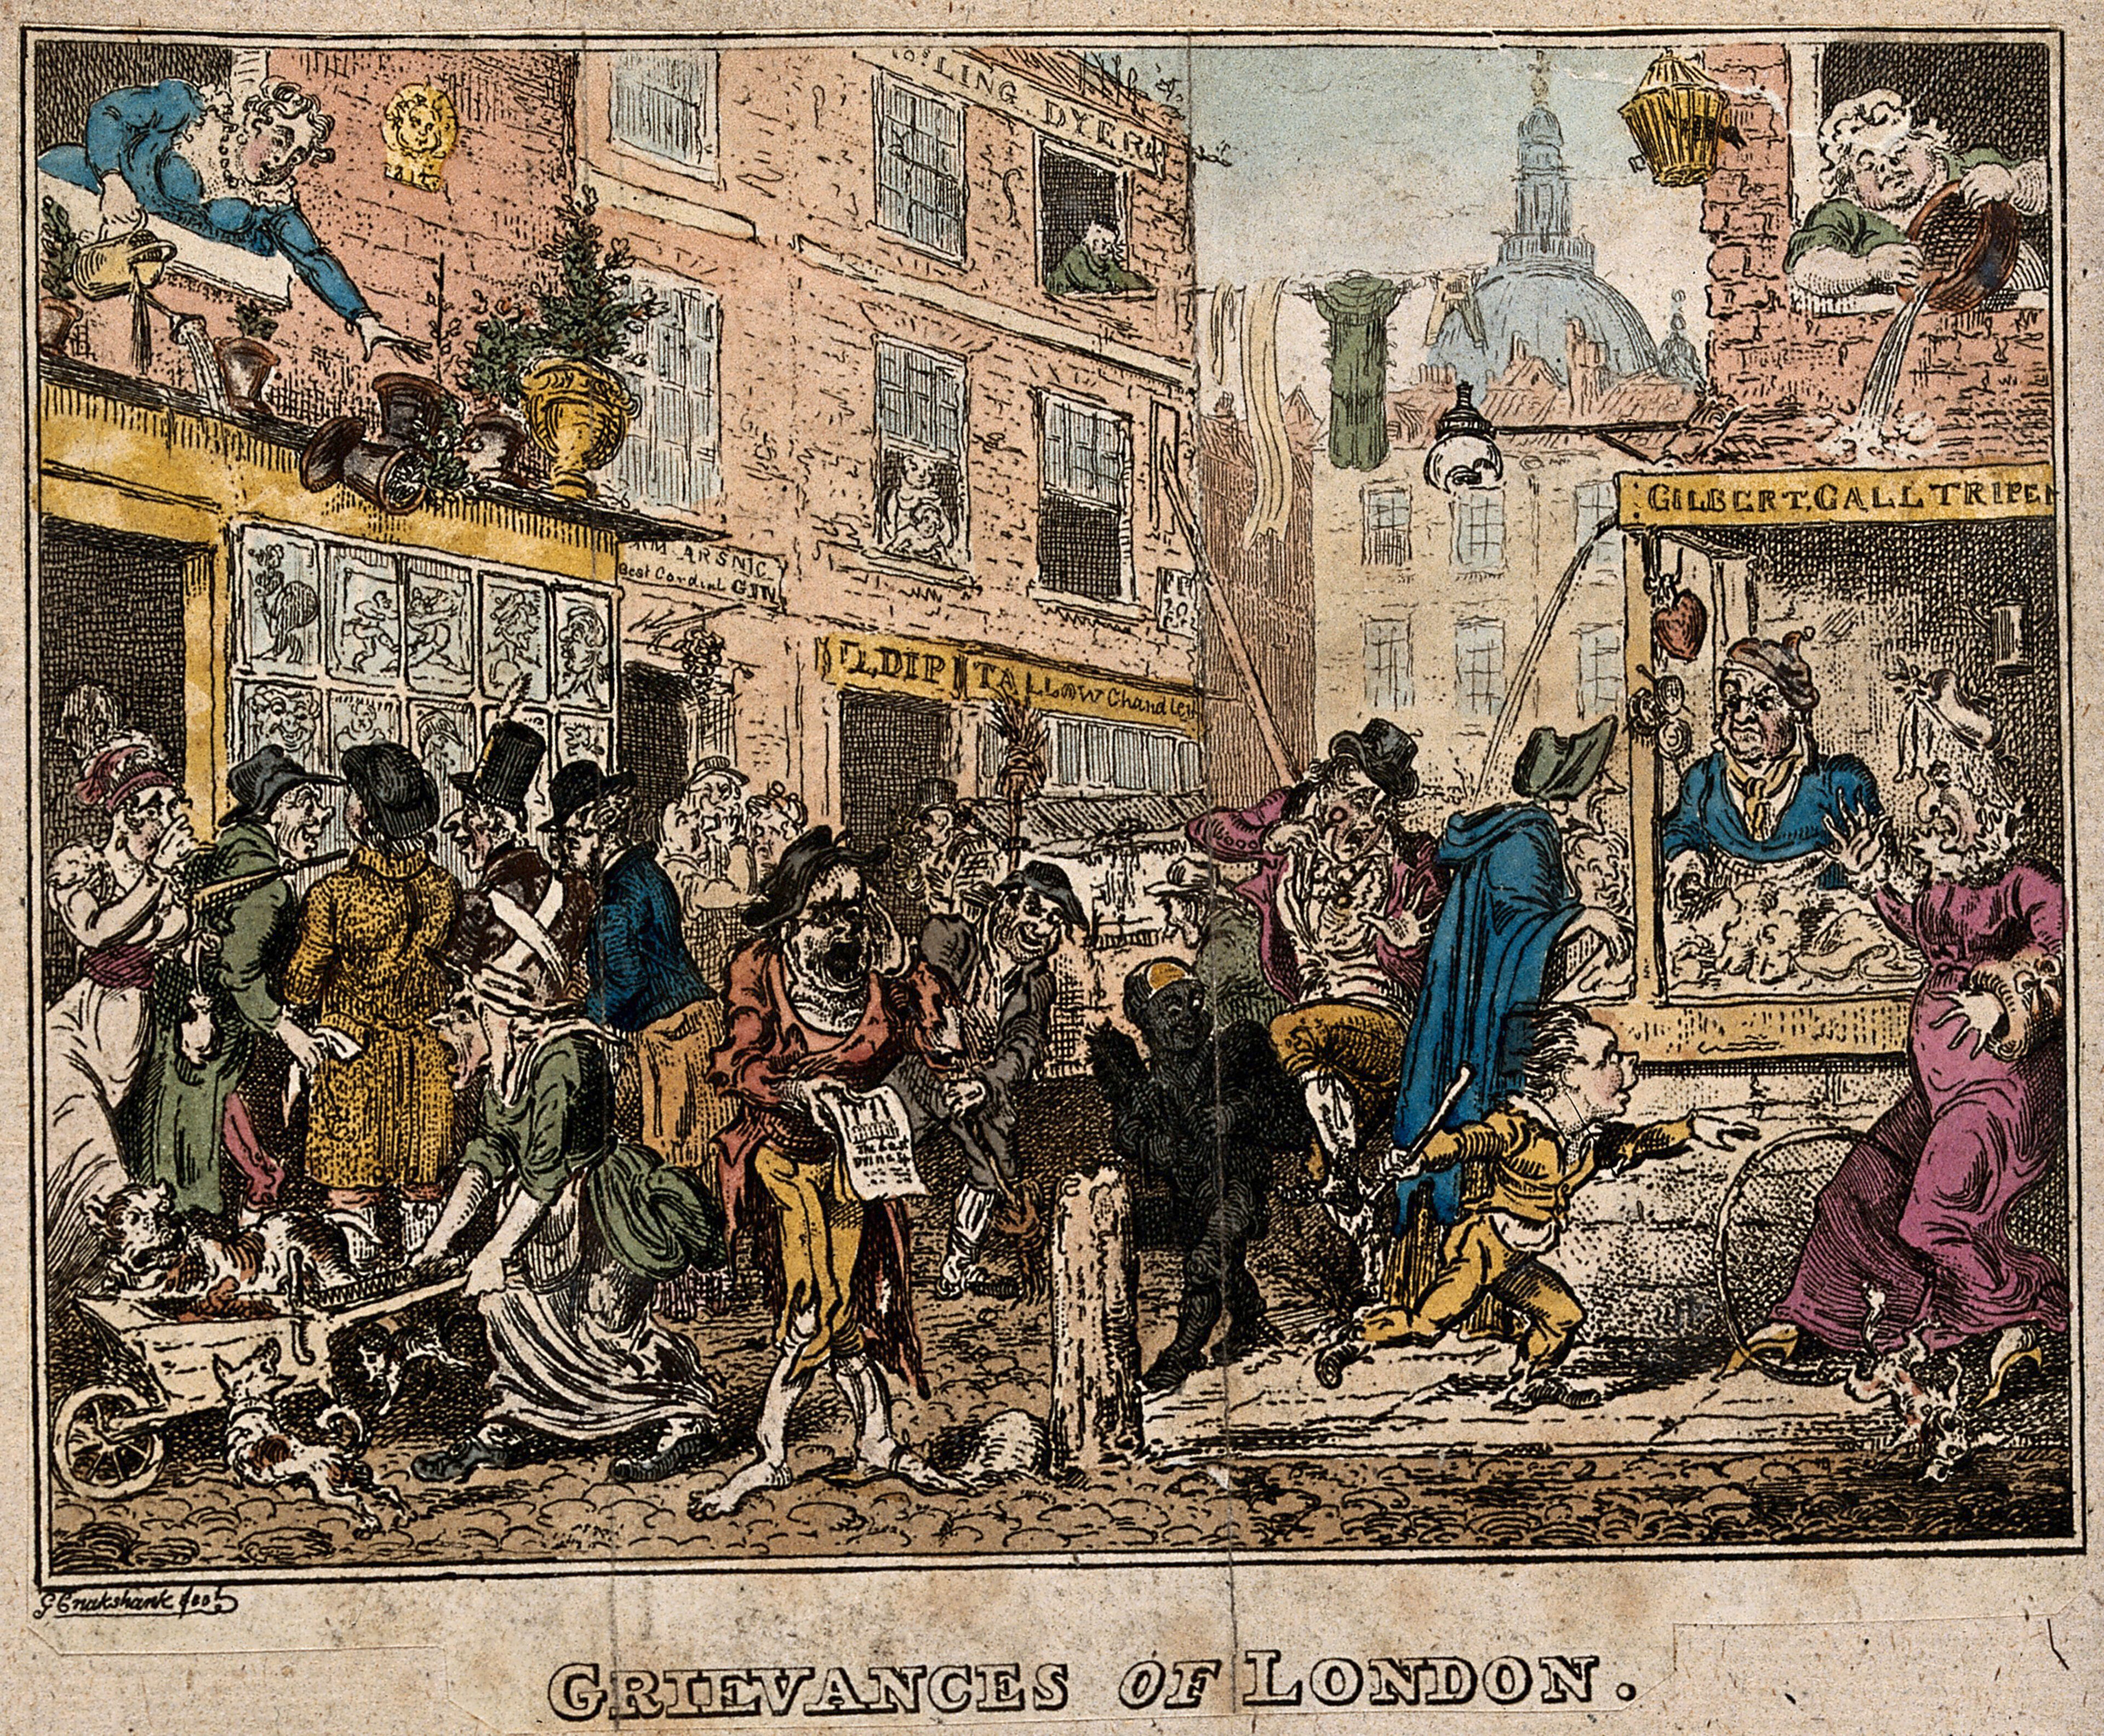 A crowded street in London. Coloured etching by G. Cruikshank, 1812.